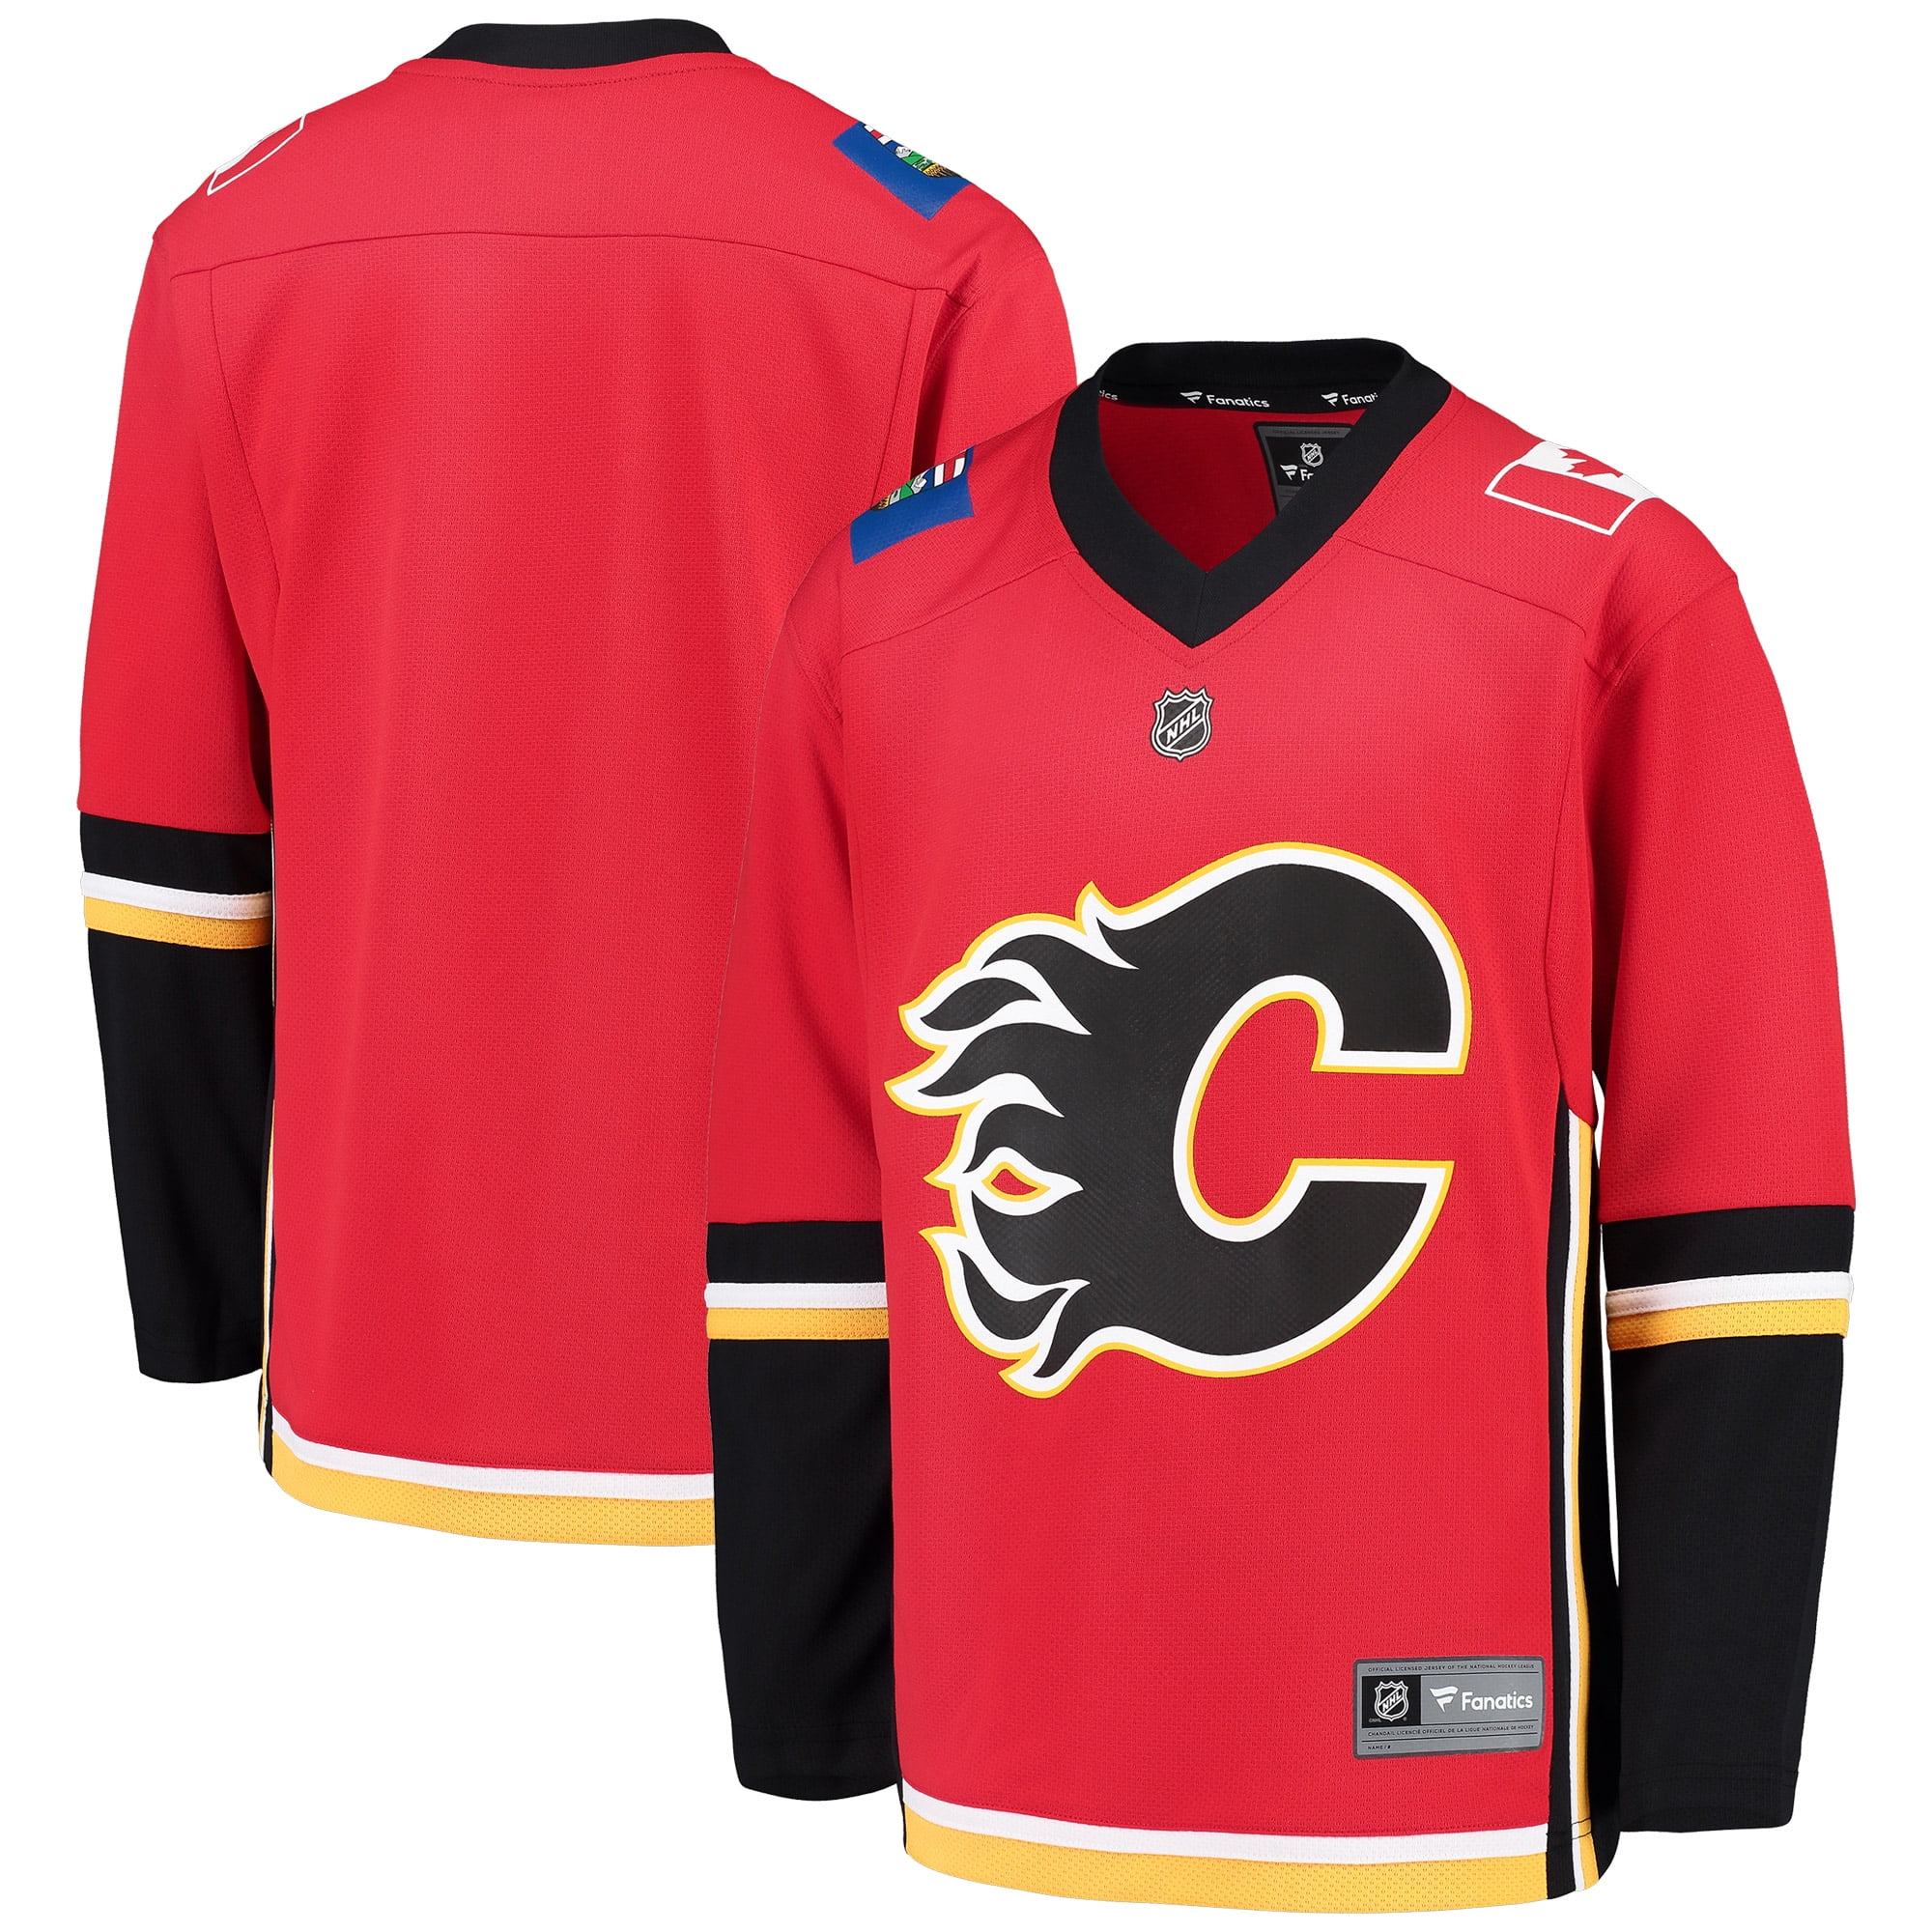 Calgary Flames Fanatics Branded Youth Home Replica Blank Jersey - Red ...